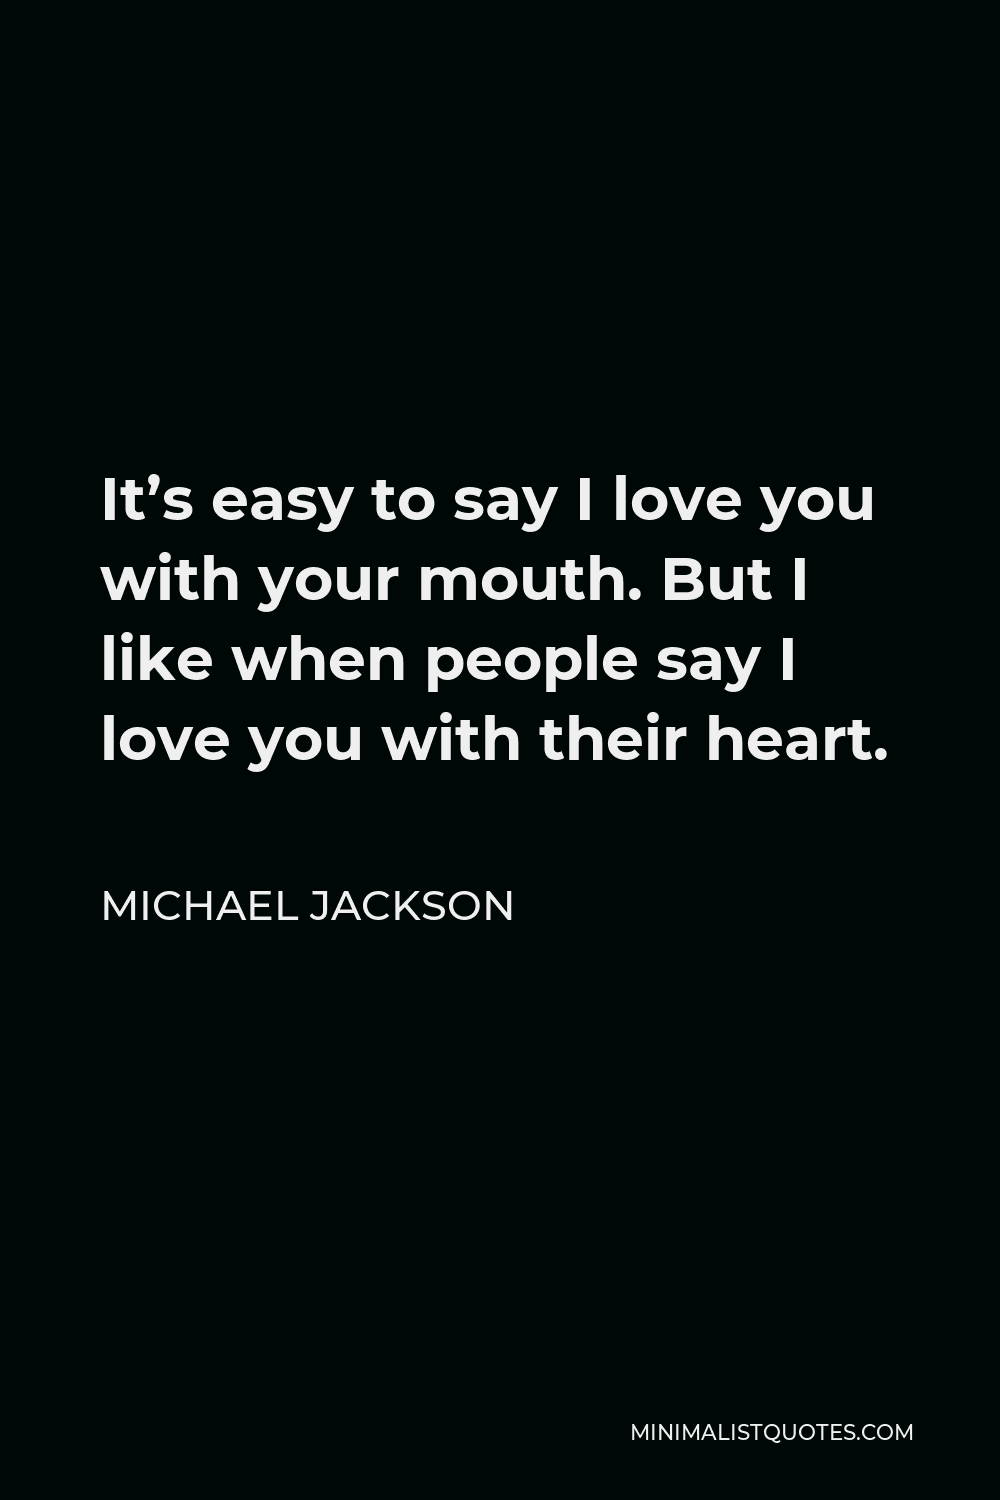 Michael Jackson Quote - It’s easy to say I love you with your mouth. But I like when people say I love you with their heart.